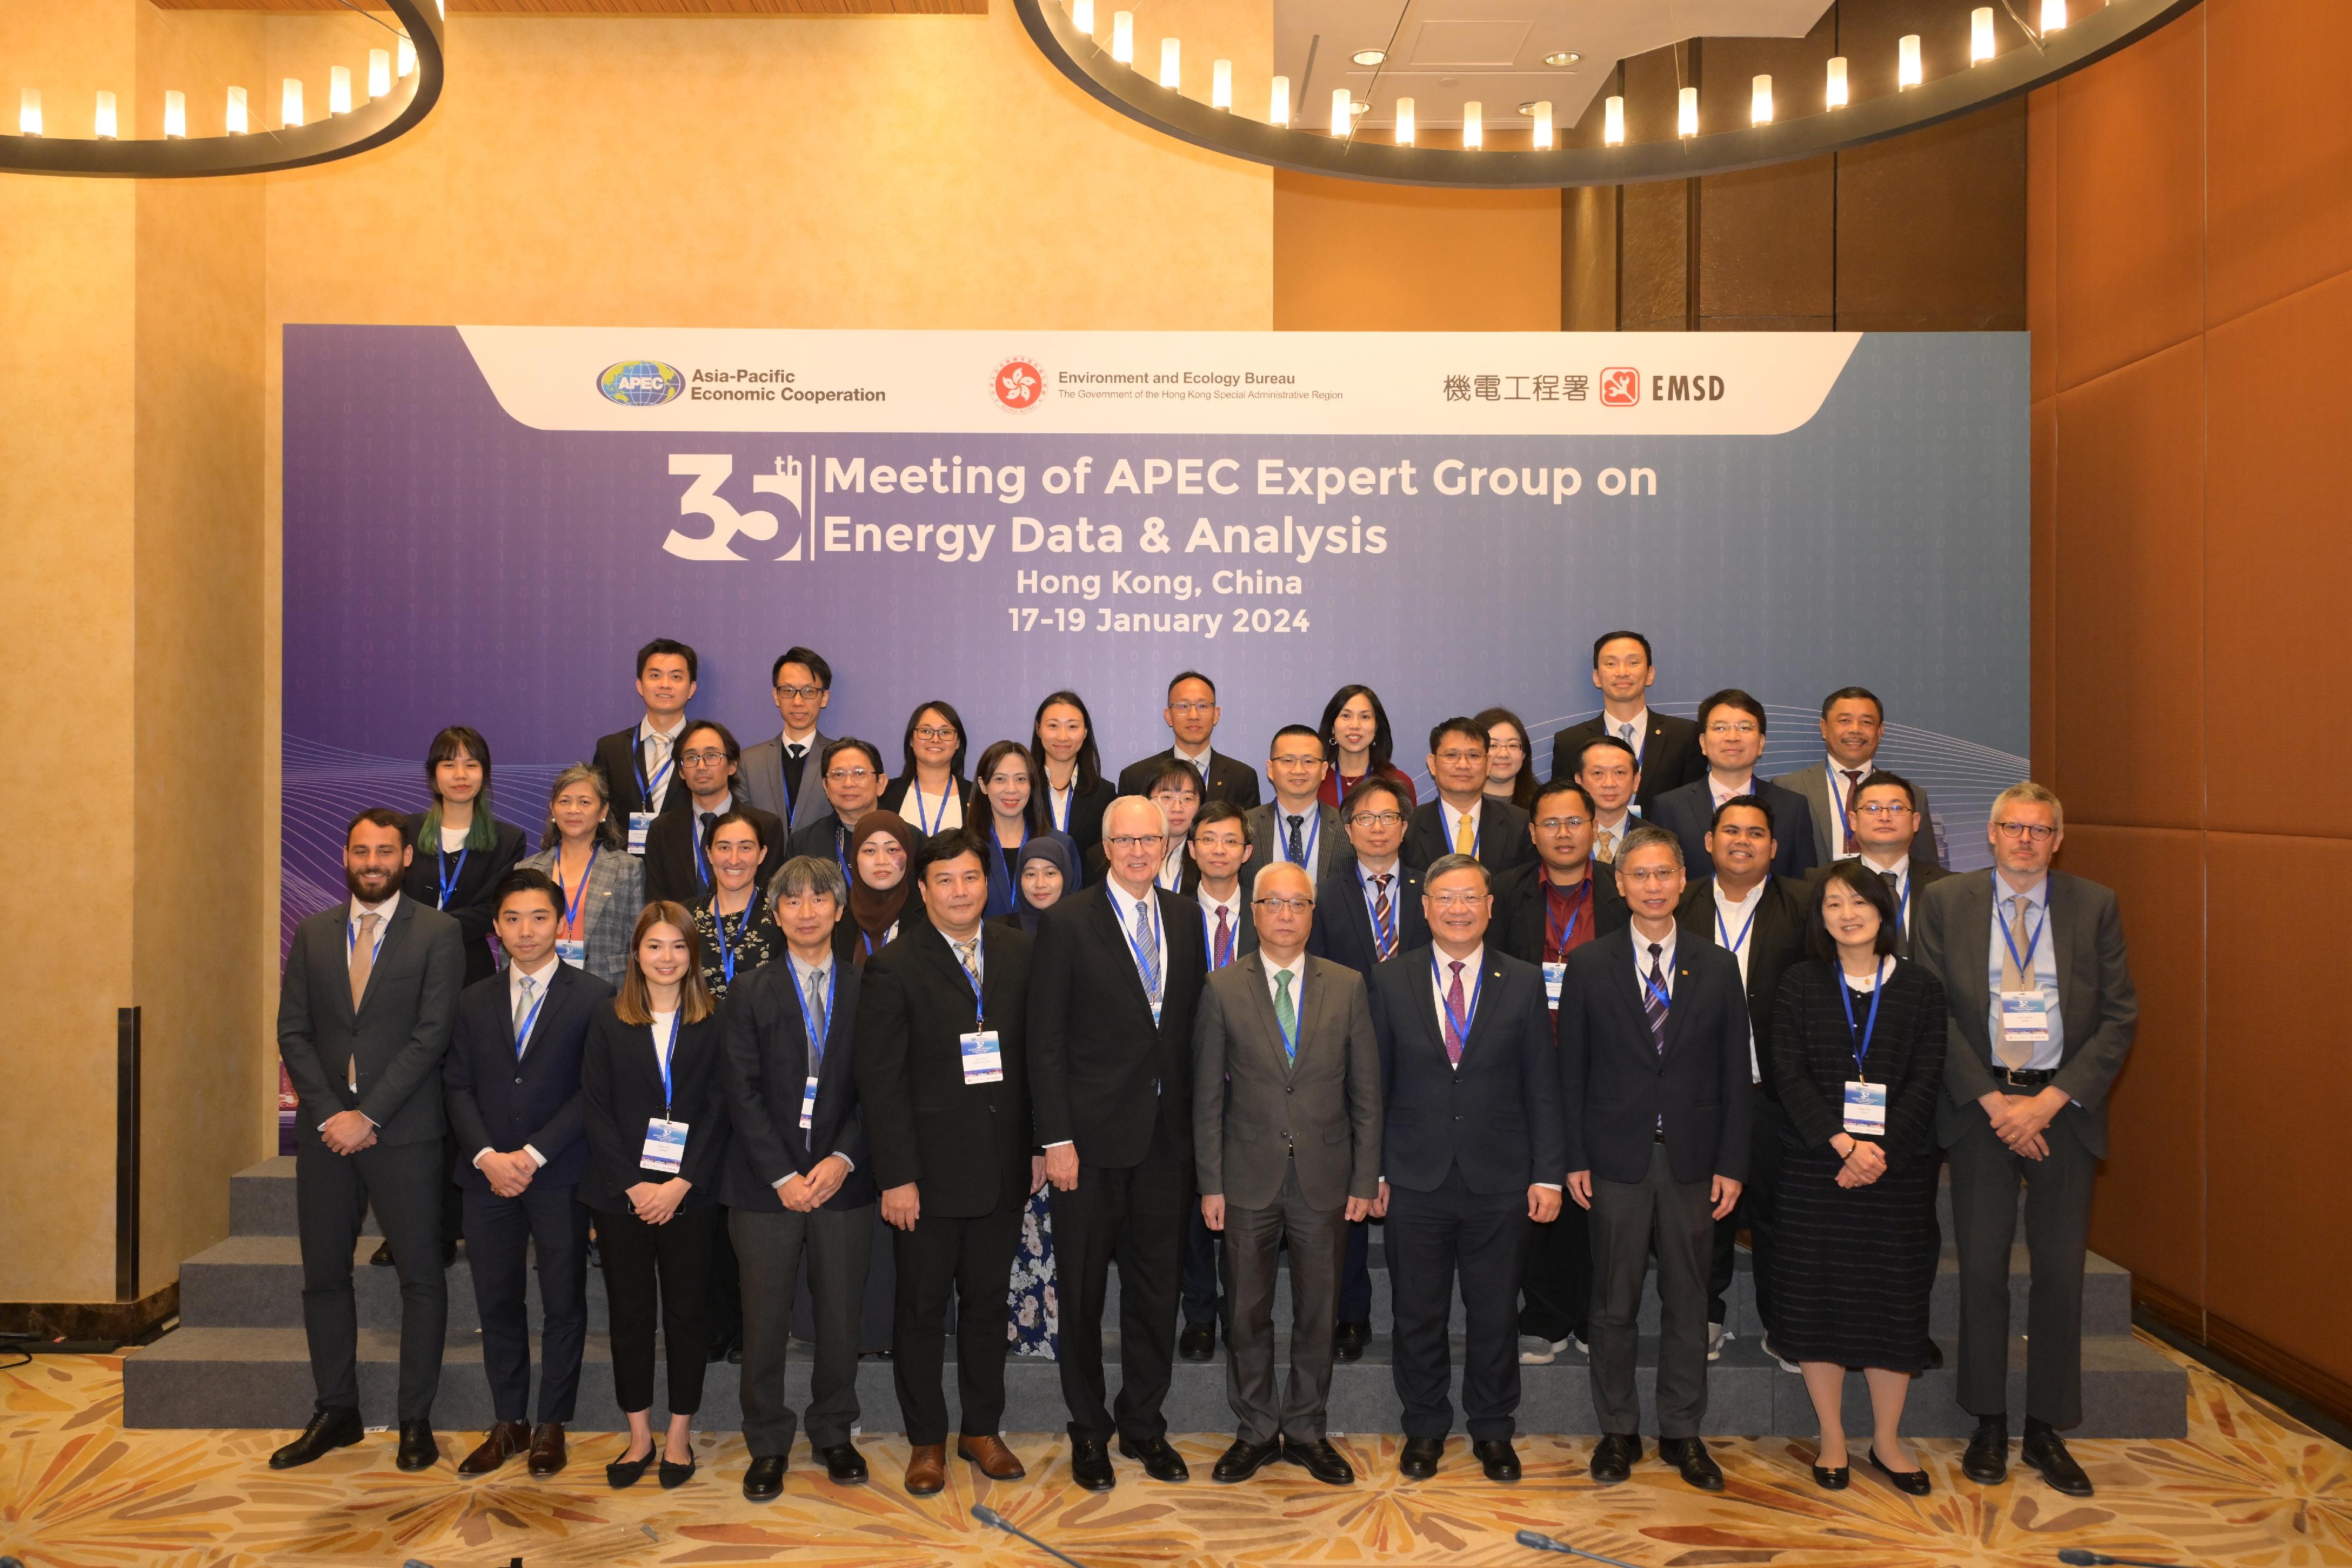 The 35th Meeting of the Asia-Pacific Economic Cooperation Expert Group on Energy Data and Analysis is being held in Hong Kong today and tomorrow (January 17 and 18). Photo shows the Secretary for Environment and Ecology, Mr Tse Chin-wan (first row, fifth right) with other participants.